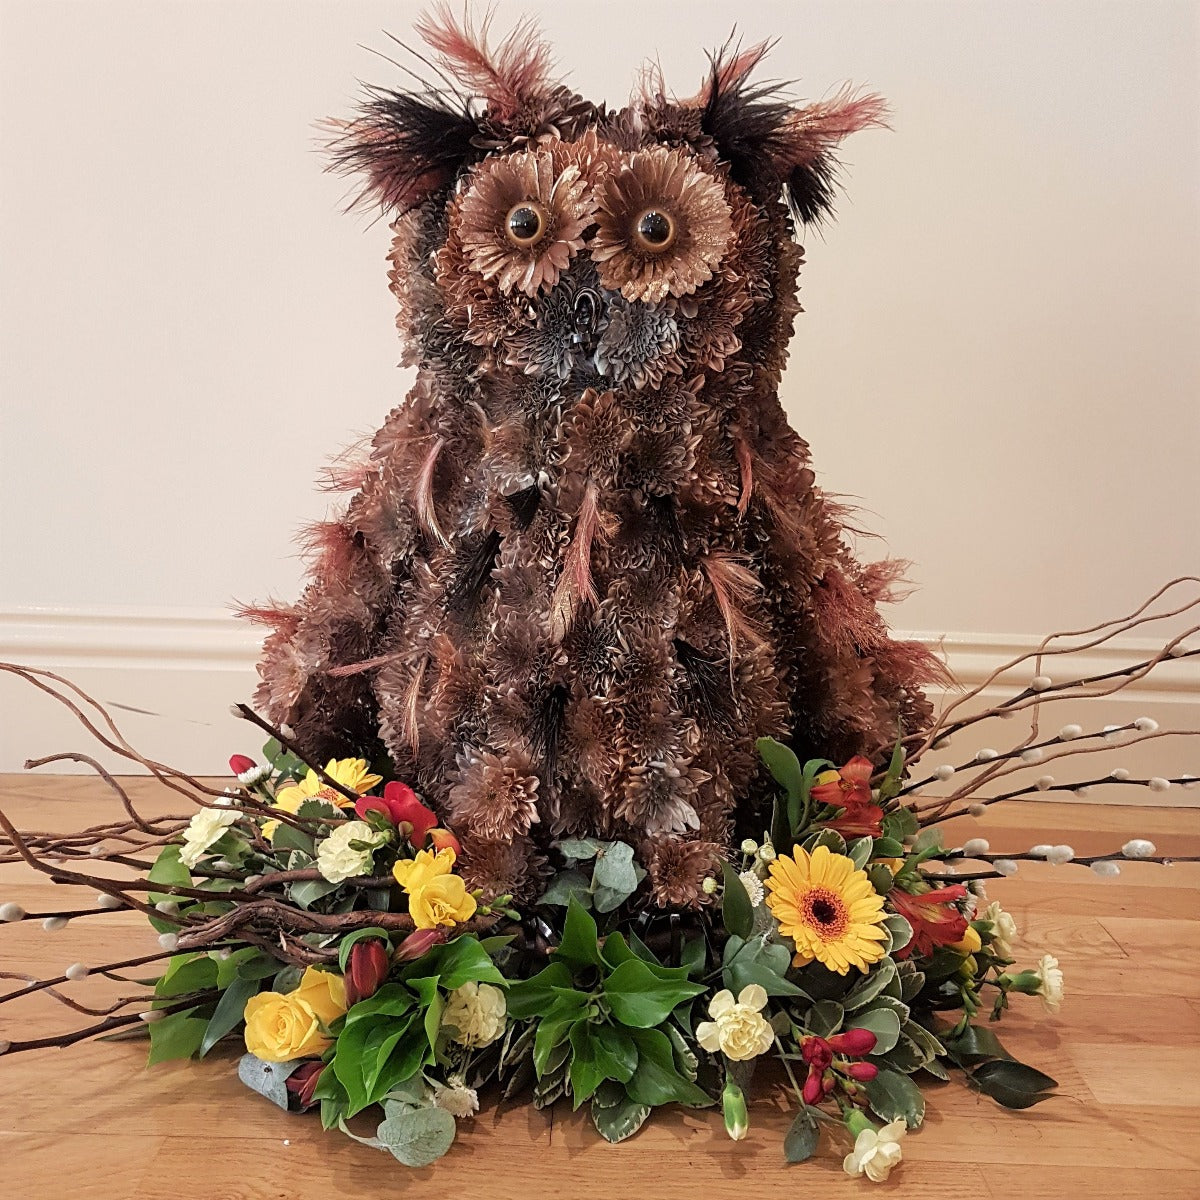 Owl Funeral Tribute Funeral Tribute